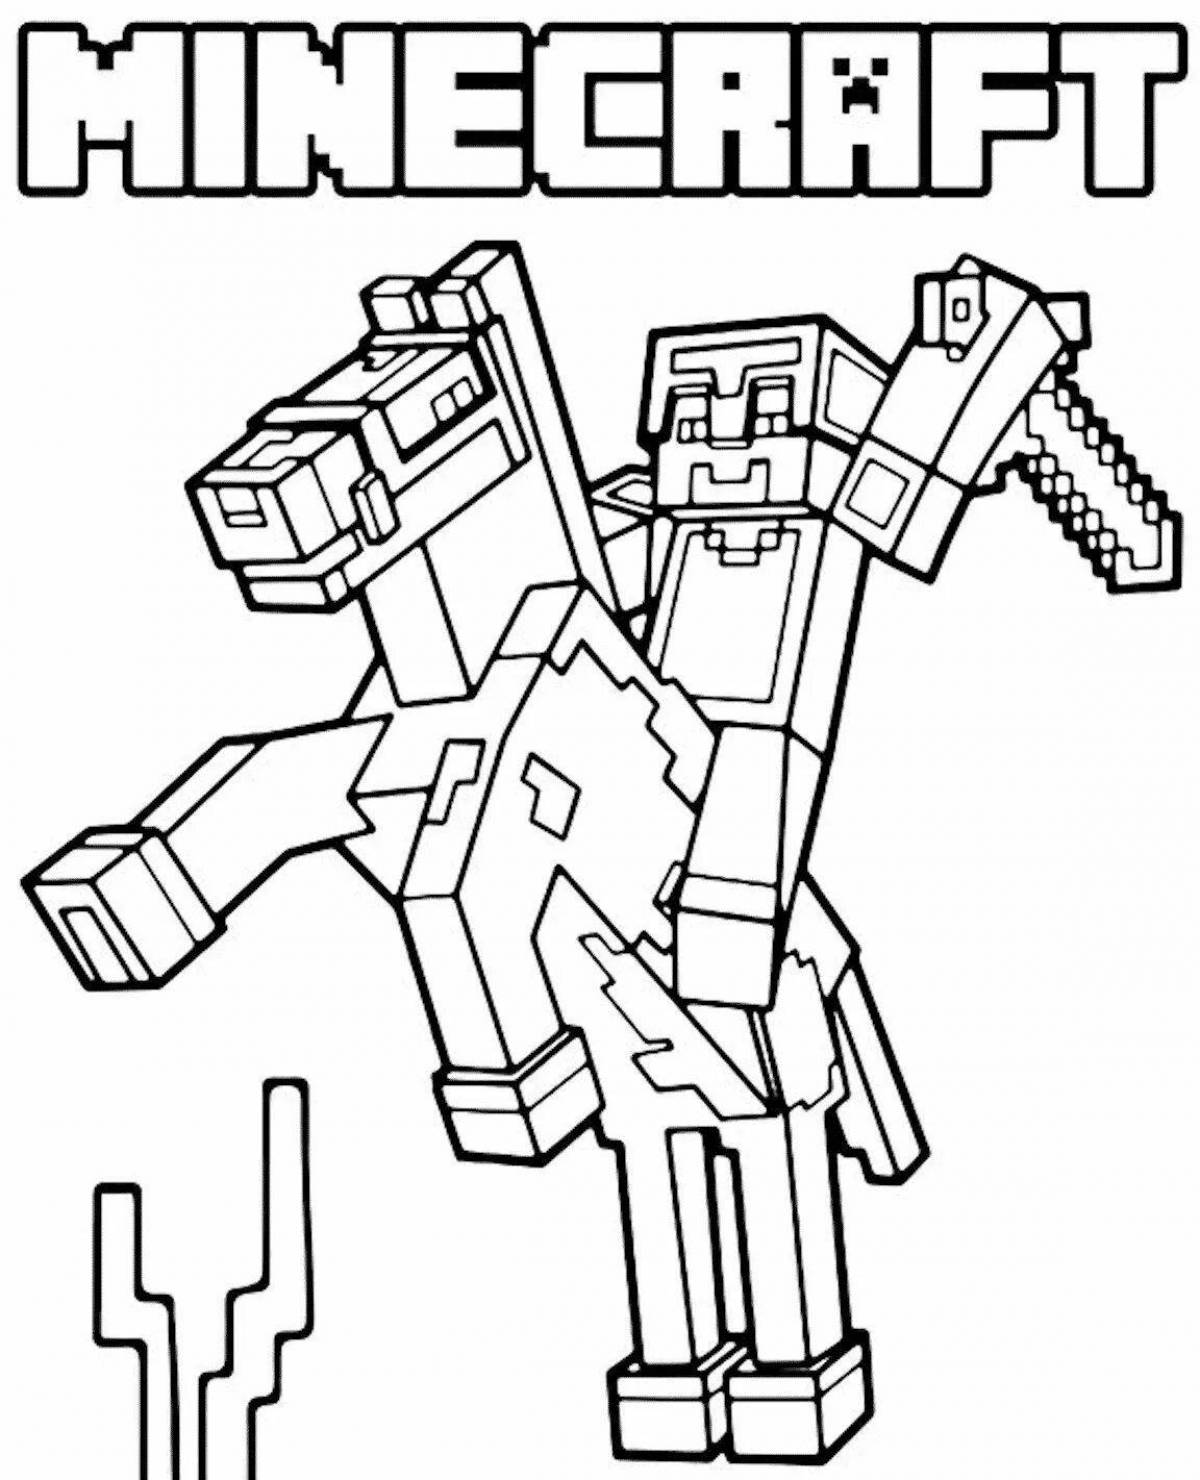 Fairy minecraft panda coloring page